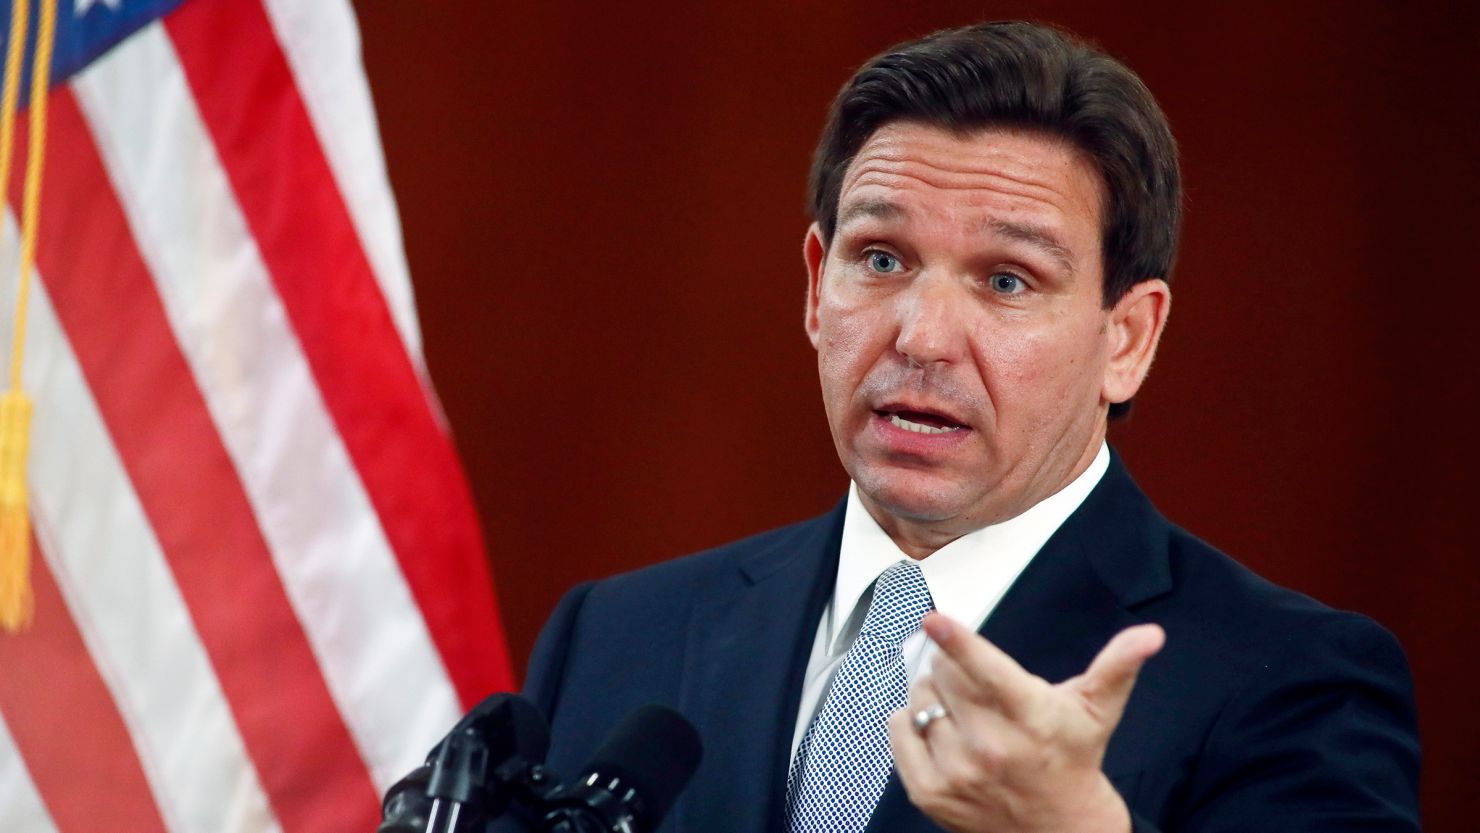 Florida Gov. Ron DeSantis has said some school districts in the state may have gone too far in removing books and materials from classrooms.